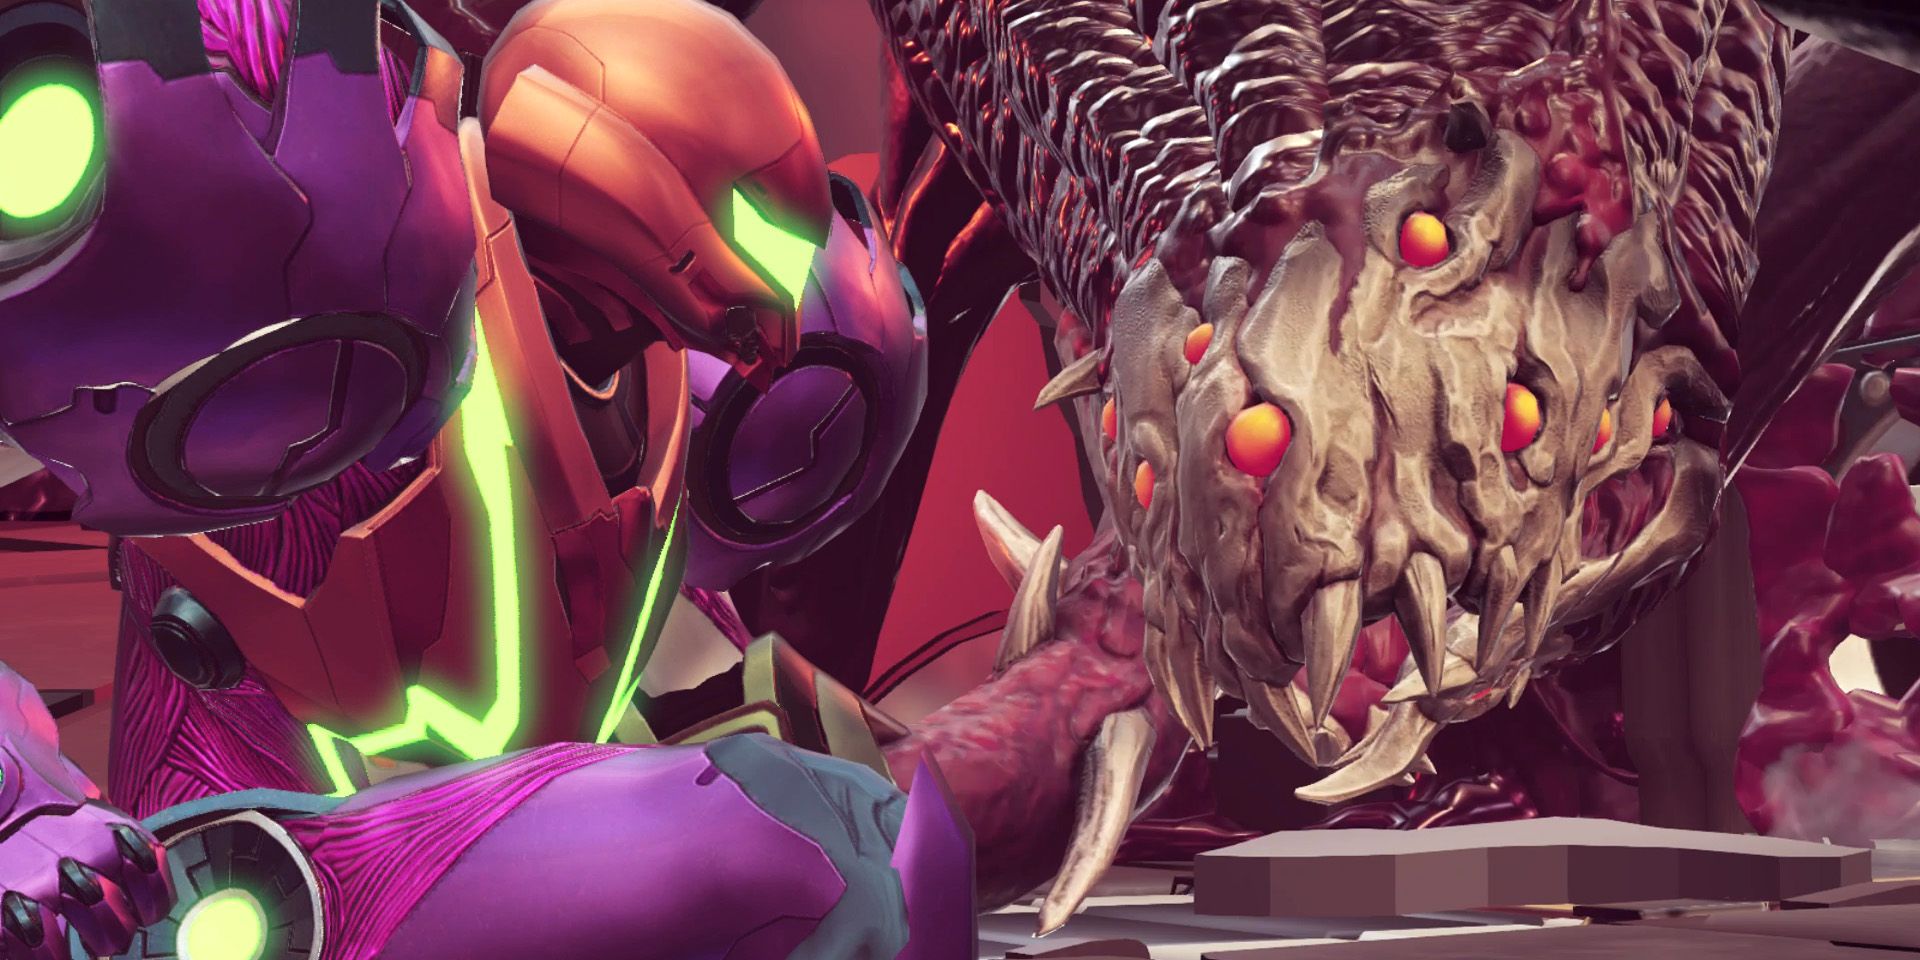 metroid-dread-experiment-no-z-57-boss-guide-cataris-00-featured-image-samus-and-boss